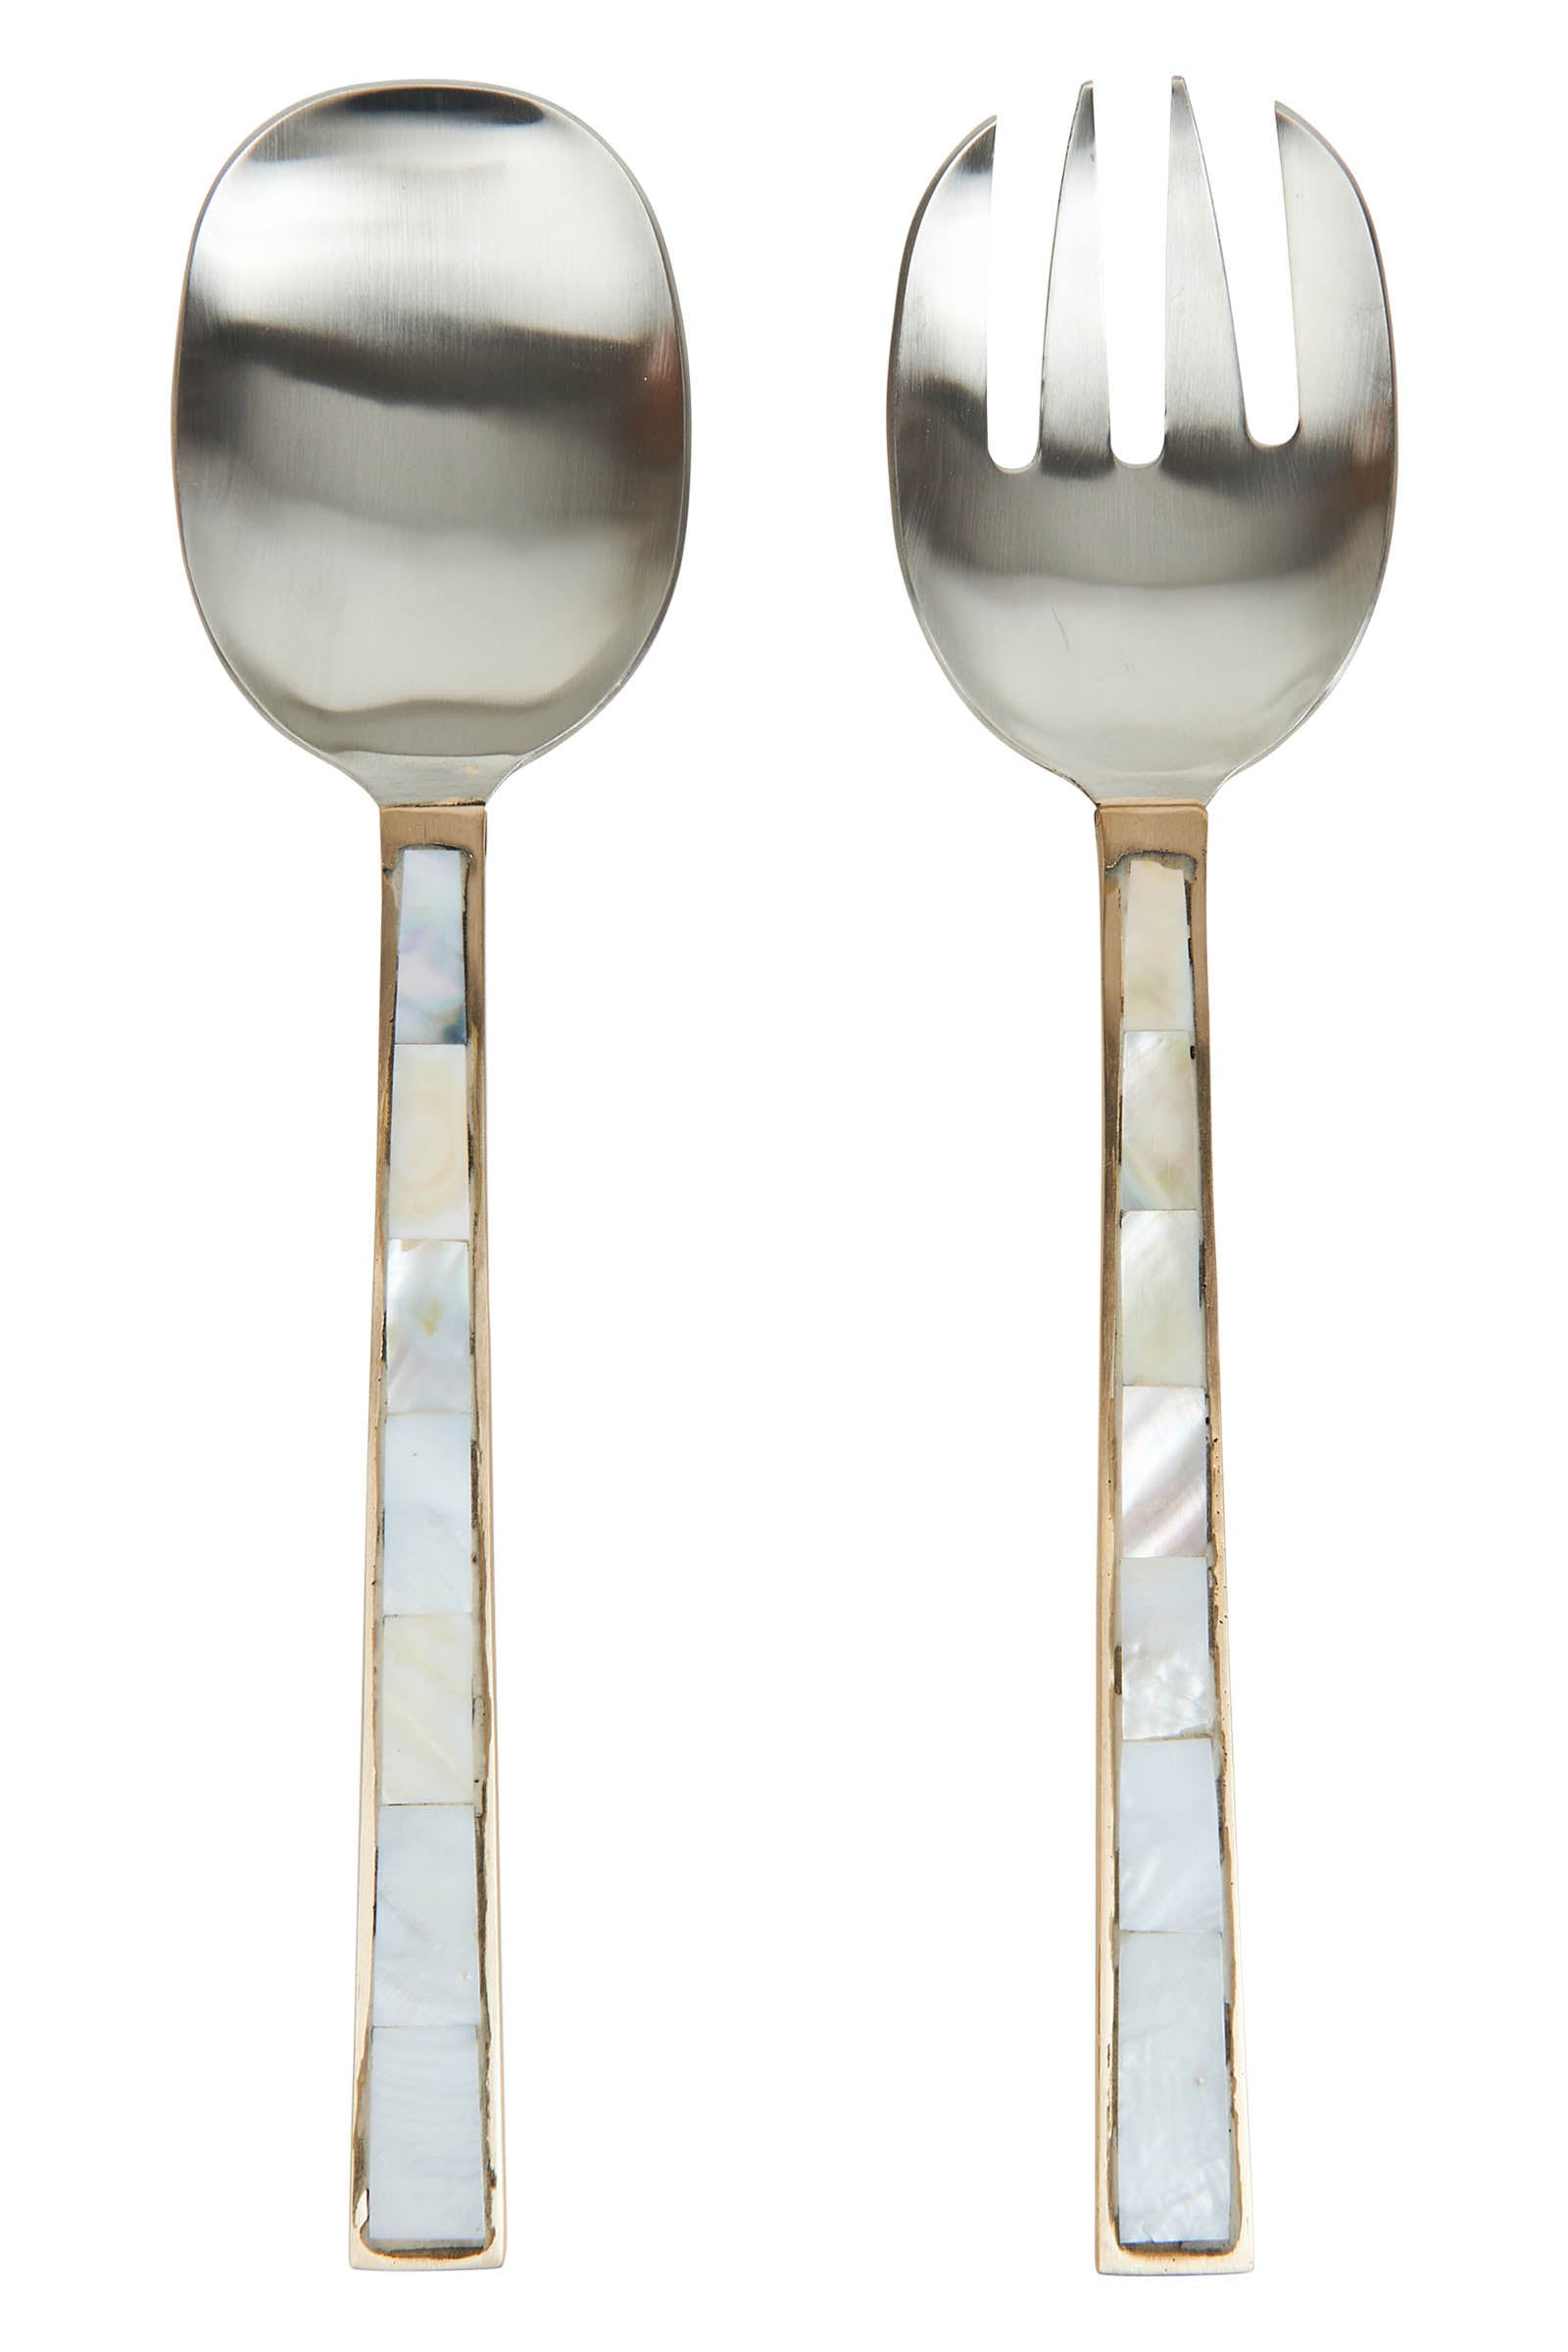 Verve Salad Server - Mother of Pearl - eb&ive Table Top